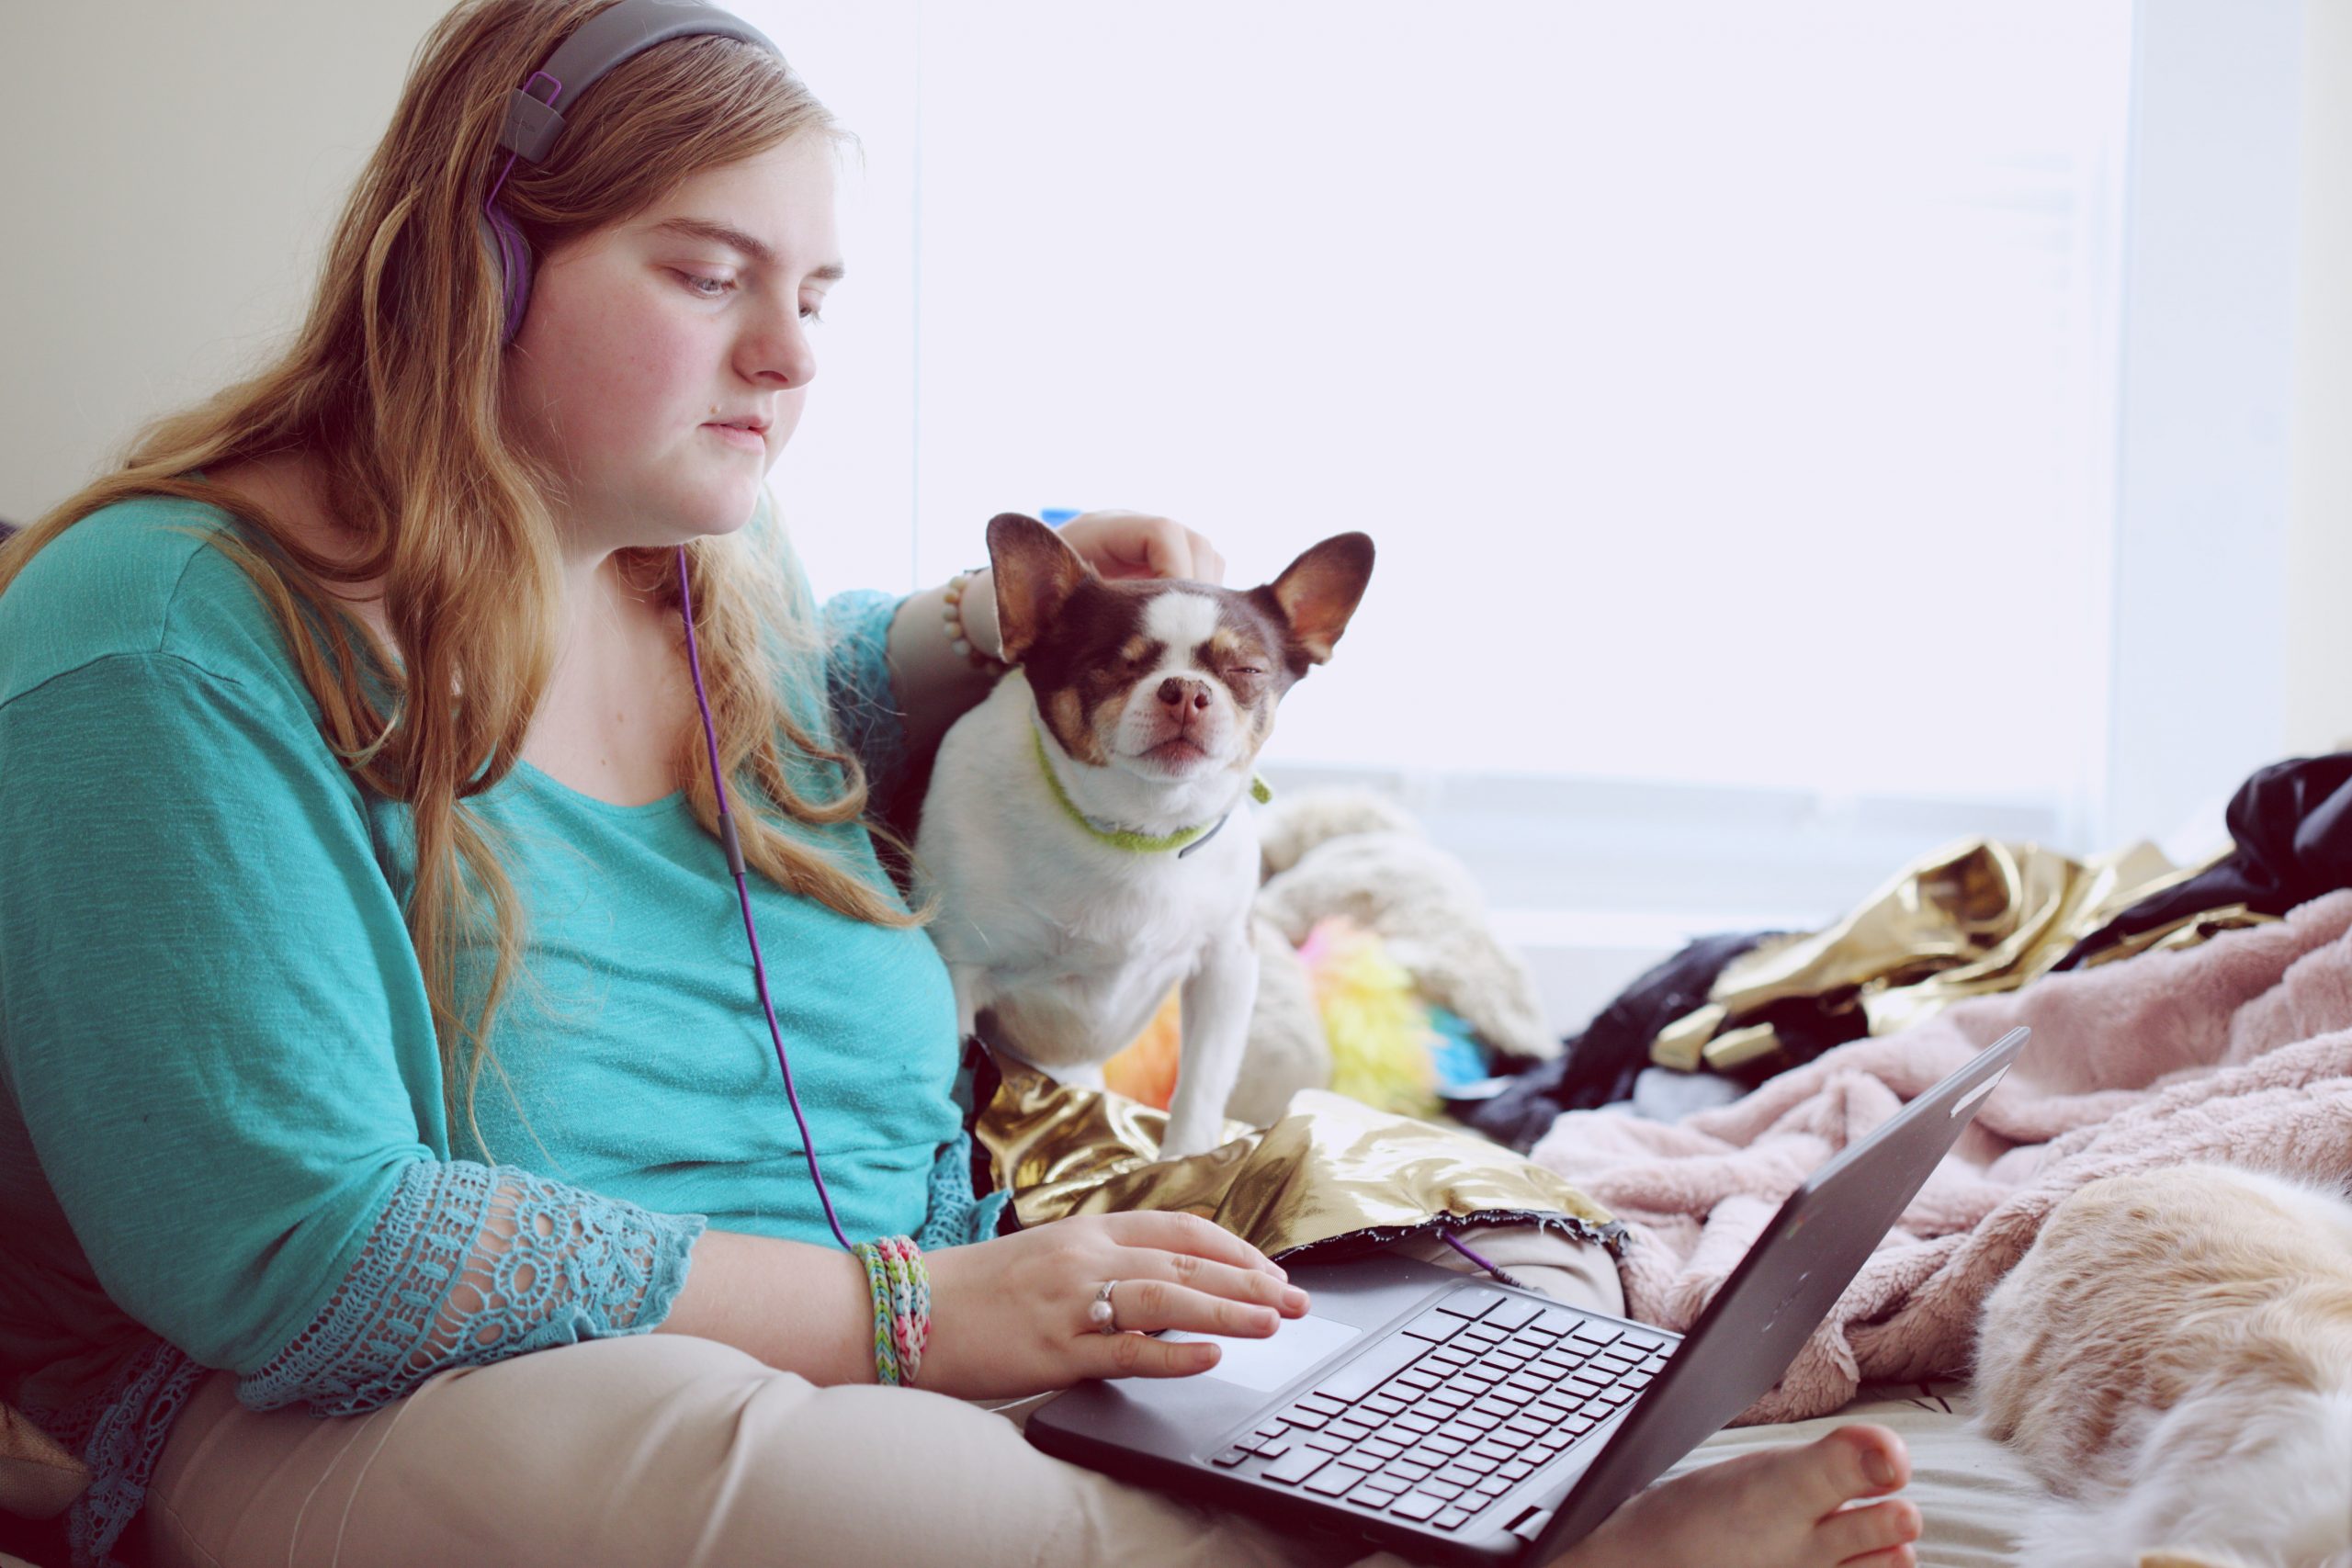 A young white disabled woman with light hair sits on her bed working on a laptop. A small brown and white dog sits next to her, it's an emotional support animal.